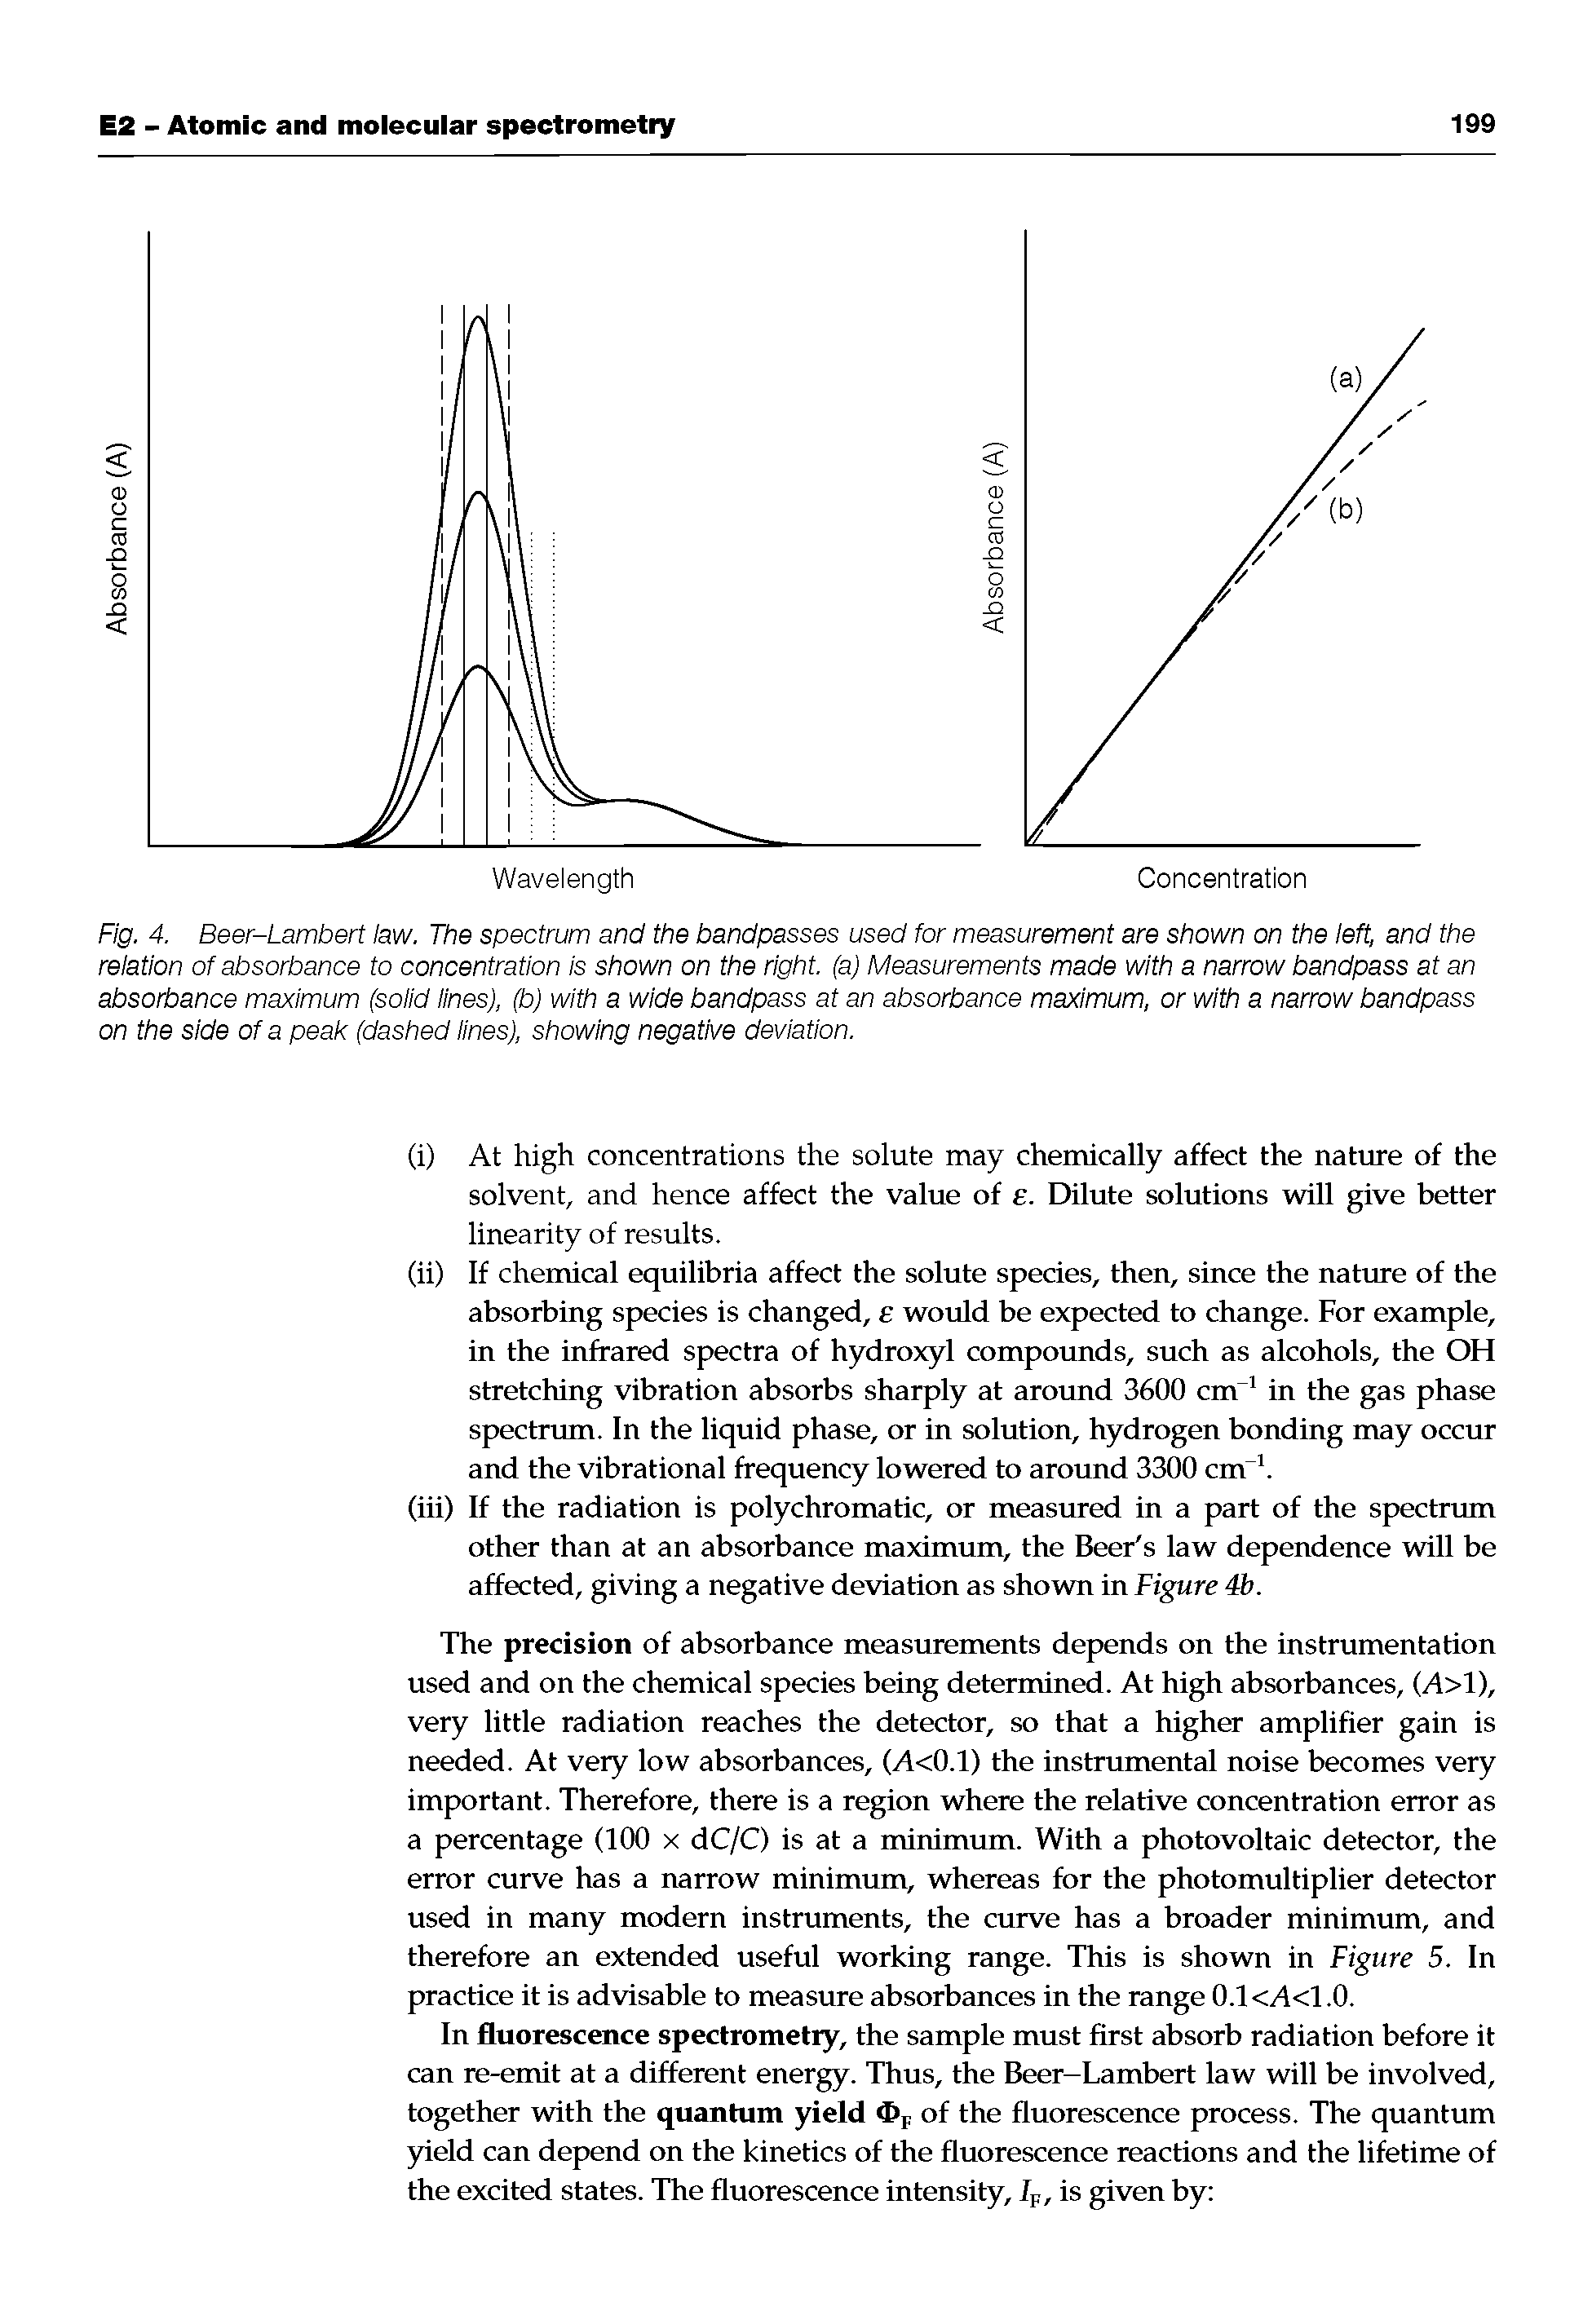 Fig. 4. Beer-Lambert law. The spectrum and the bandpasses used for measurement are shown on the left, and the relation of absorbance to concentration is shown on the right, (a) Measurements made with a narrow bandpass at an absorbance maximum (solid lines), (b) with a wide bandpass at an absorbance maximum, or with a narrow bandpass on the side of a peak (dashed lines), showing negative deviation.